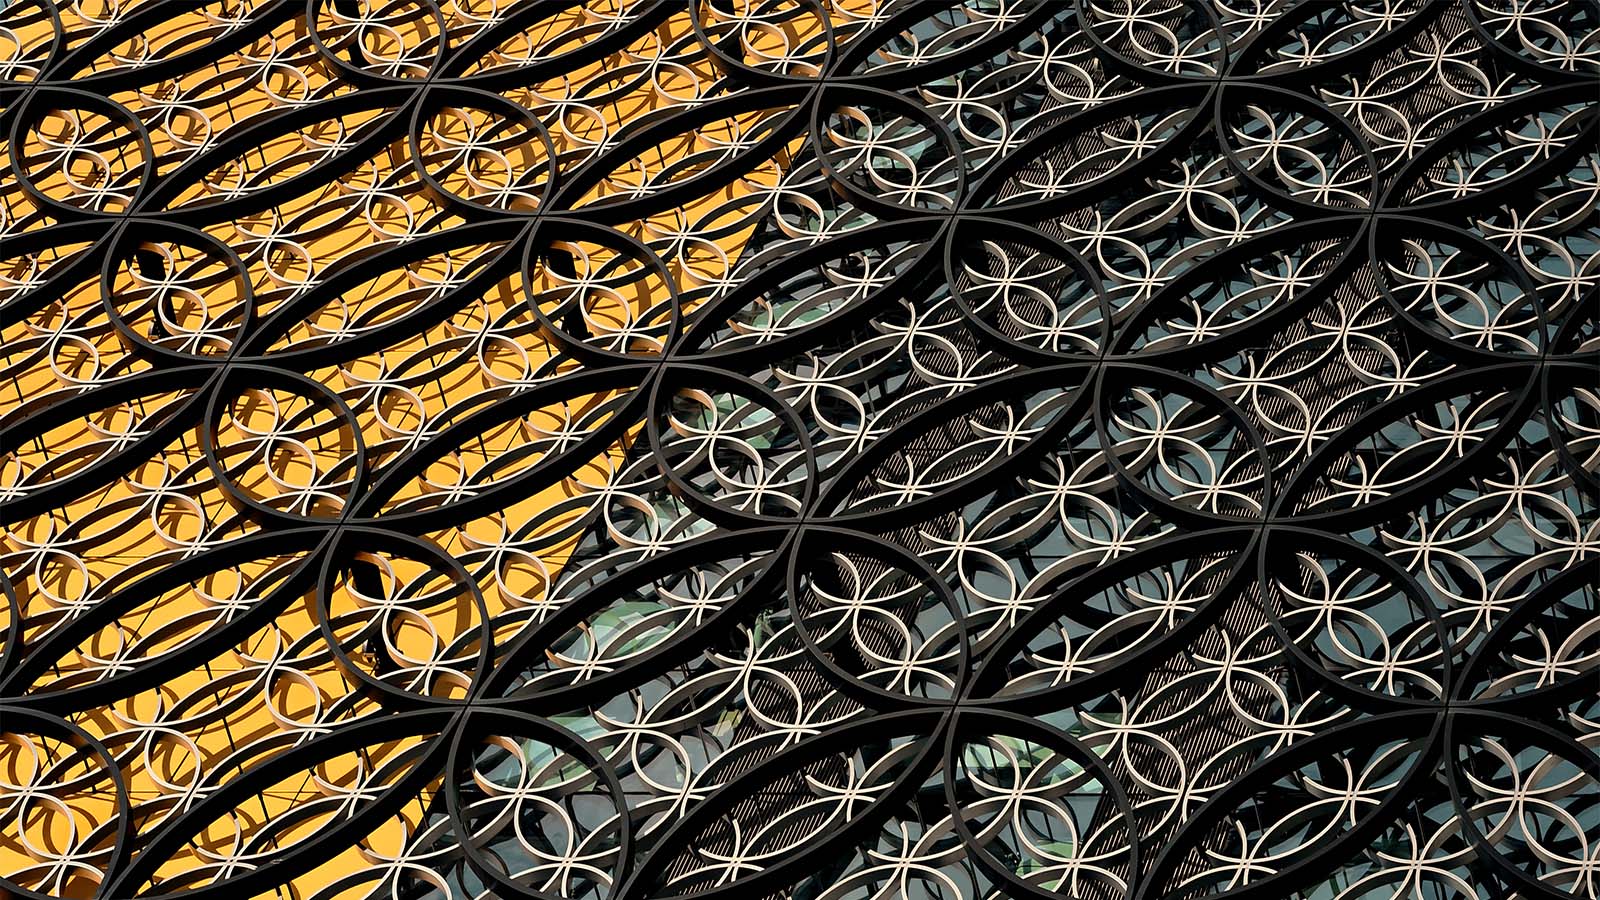 architectural element showing interlocking metal wire in a geometric design - a similar pattern to internal linking on a website